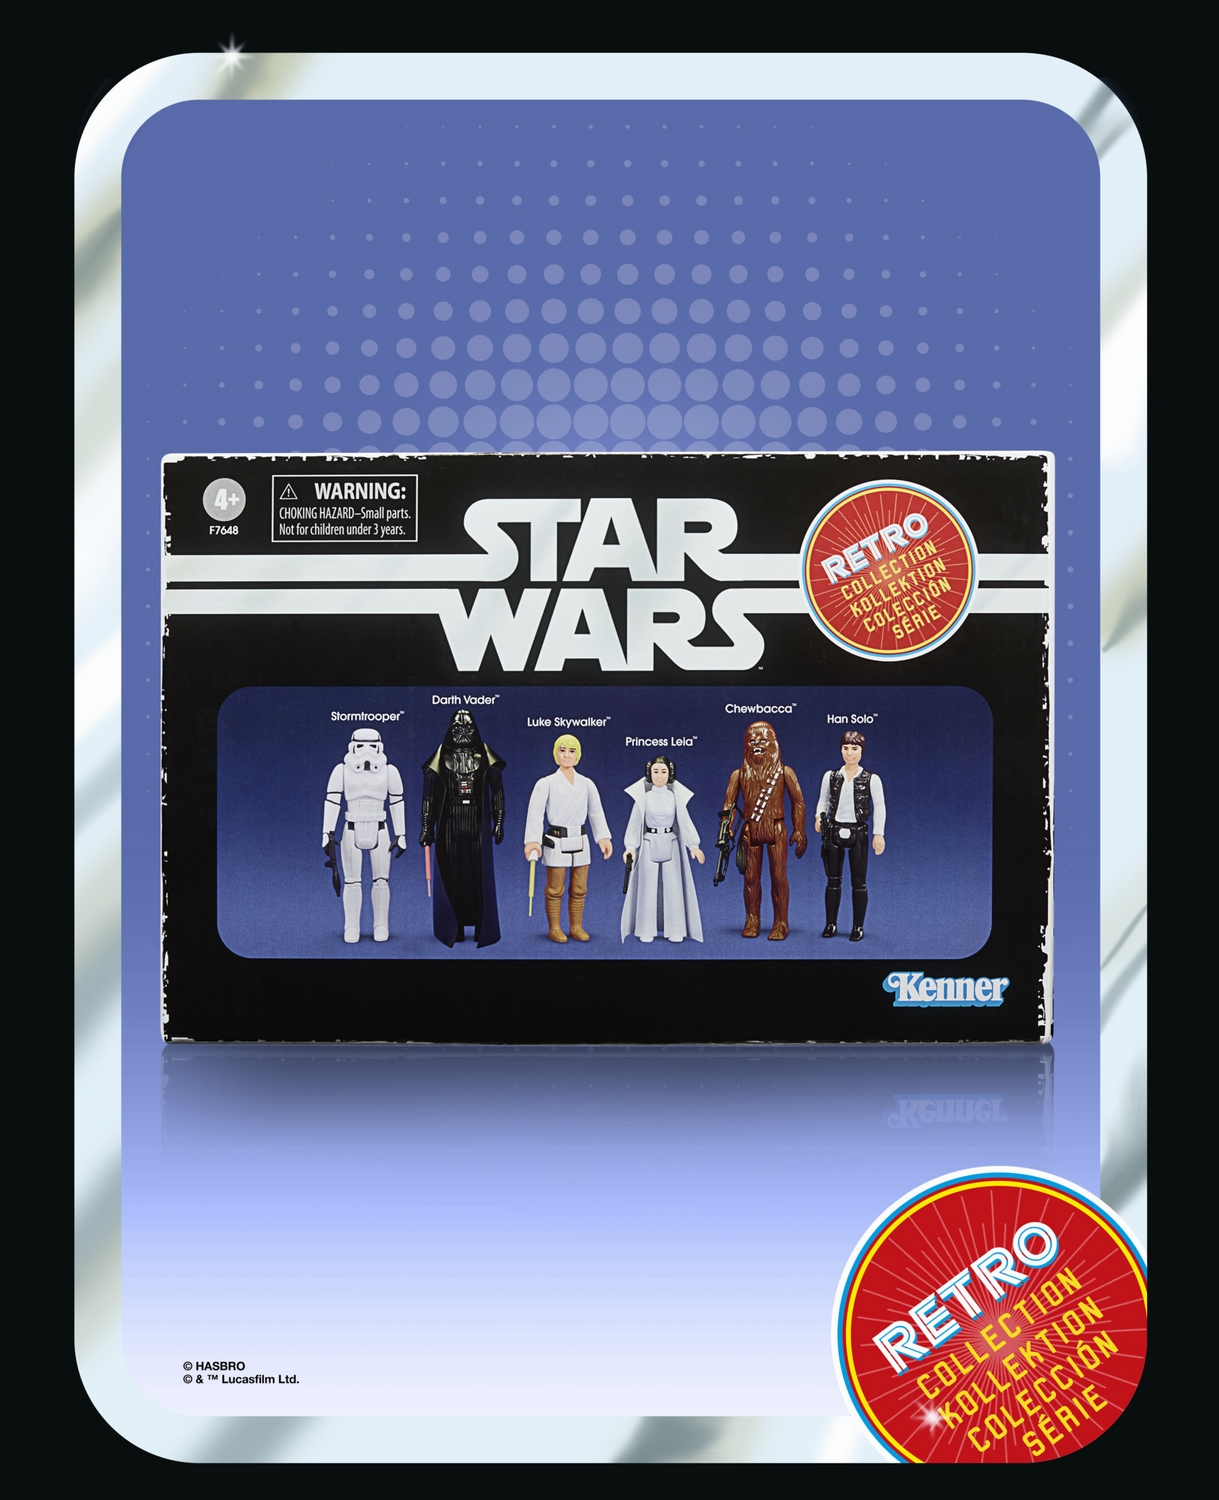 STAR WARS RETRO COLLECTION STAR WARS A NEW HOPE COLLECTIBLE MULTIPACK - 12.jpg